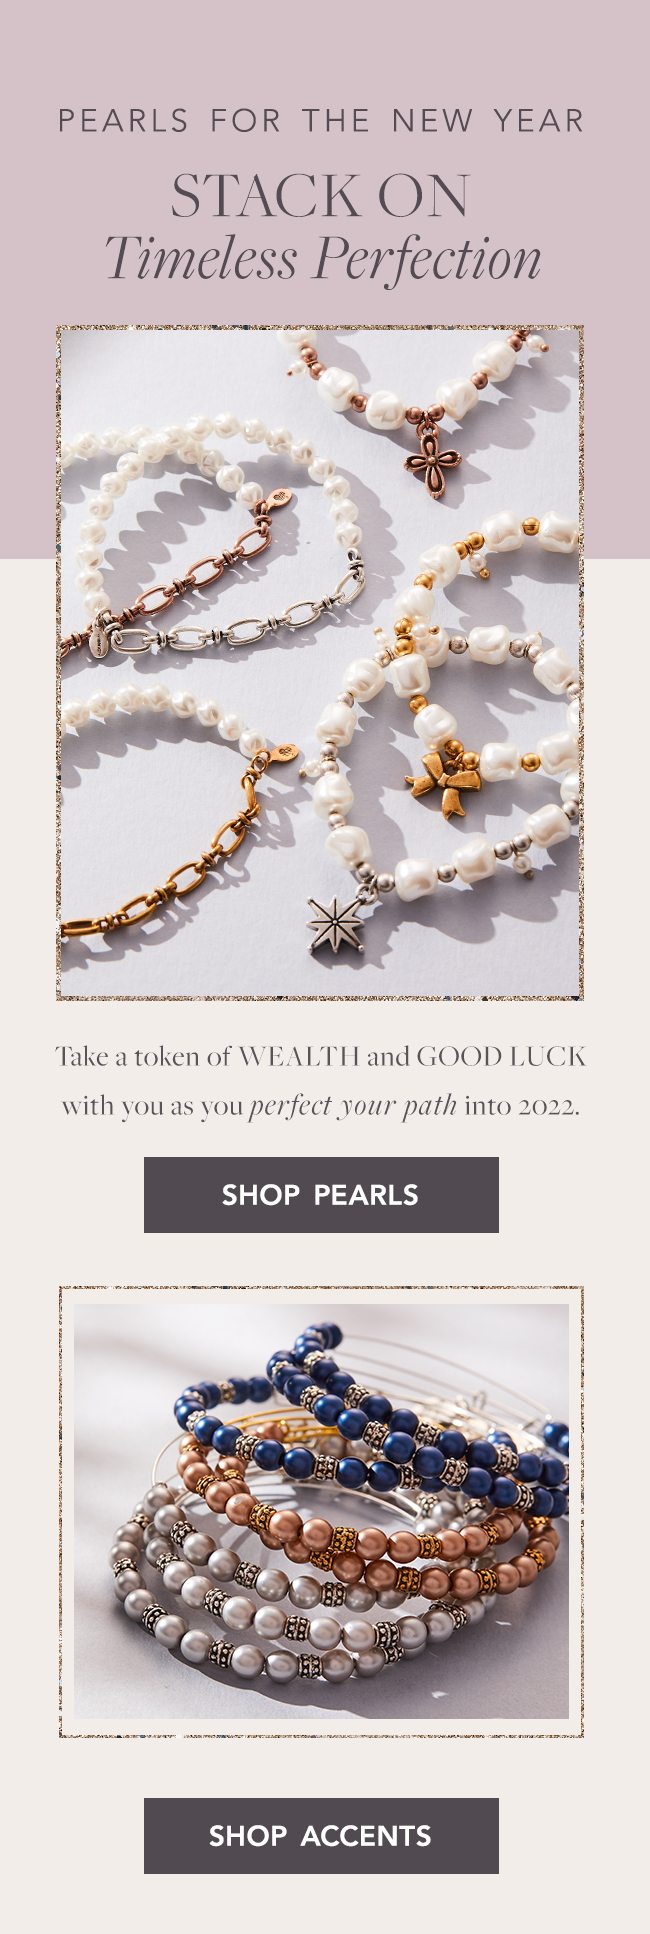 Shop New Year Pearls